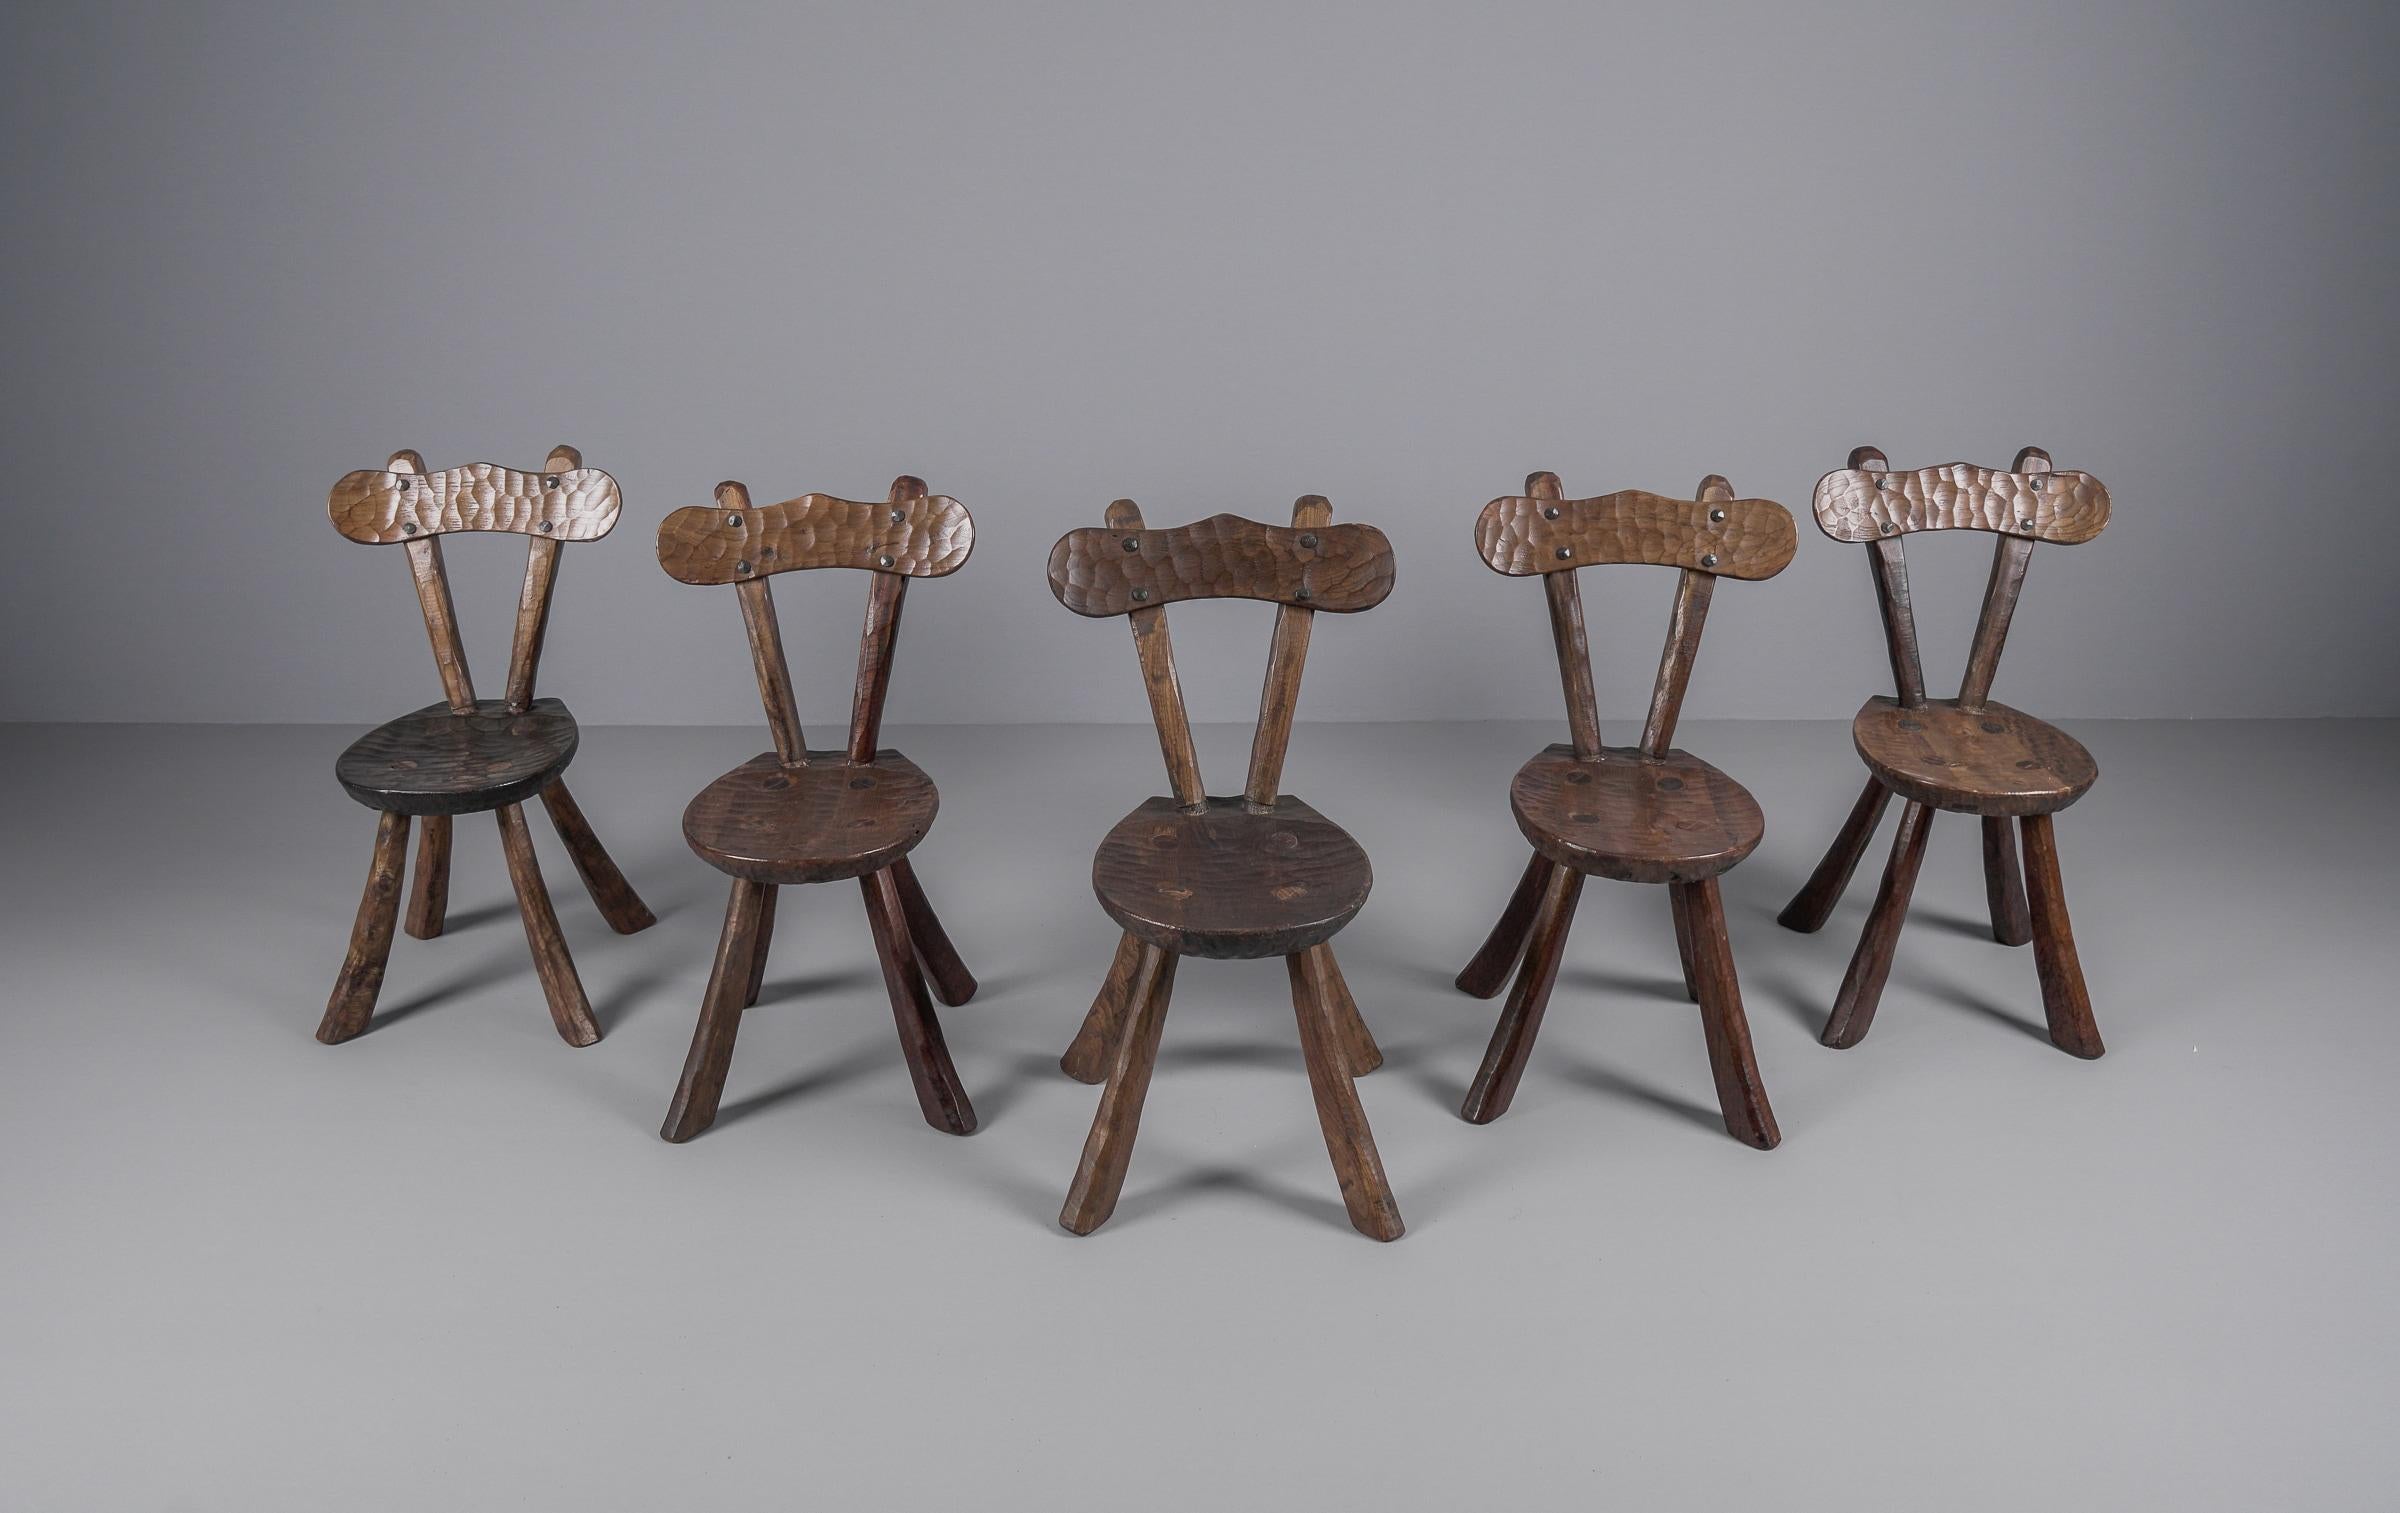 Elm Set of 5 Brutalist Rustic Modern Sculptured Chairs i. t. Style of Alexandre Noll For Sale